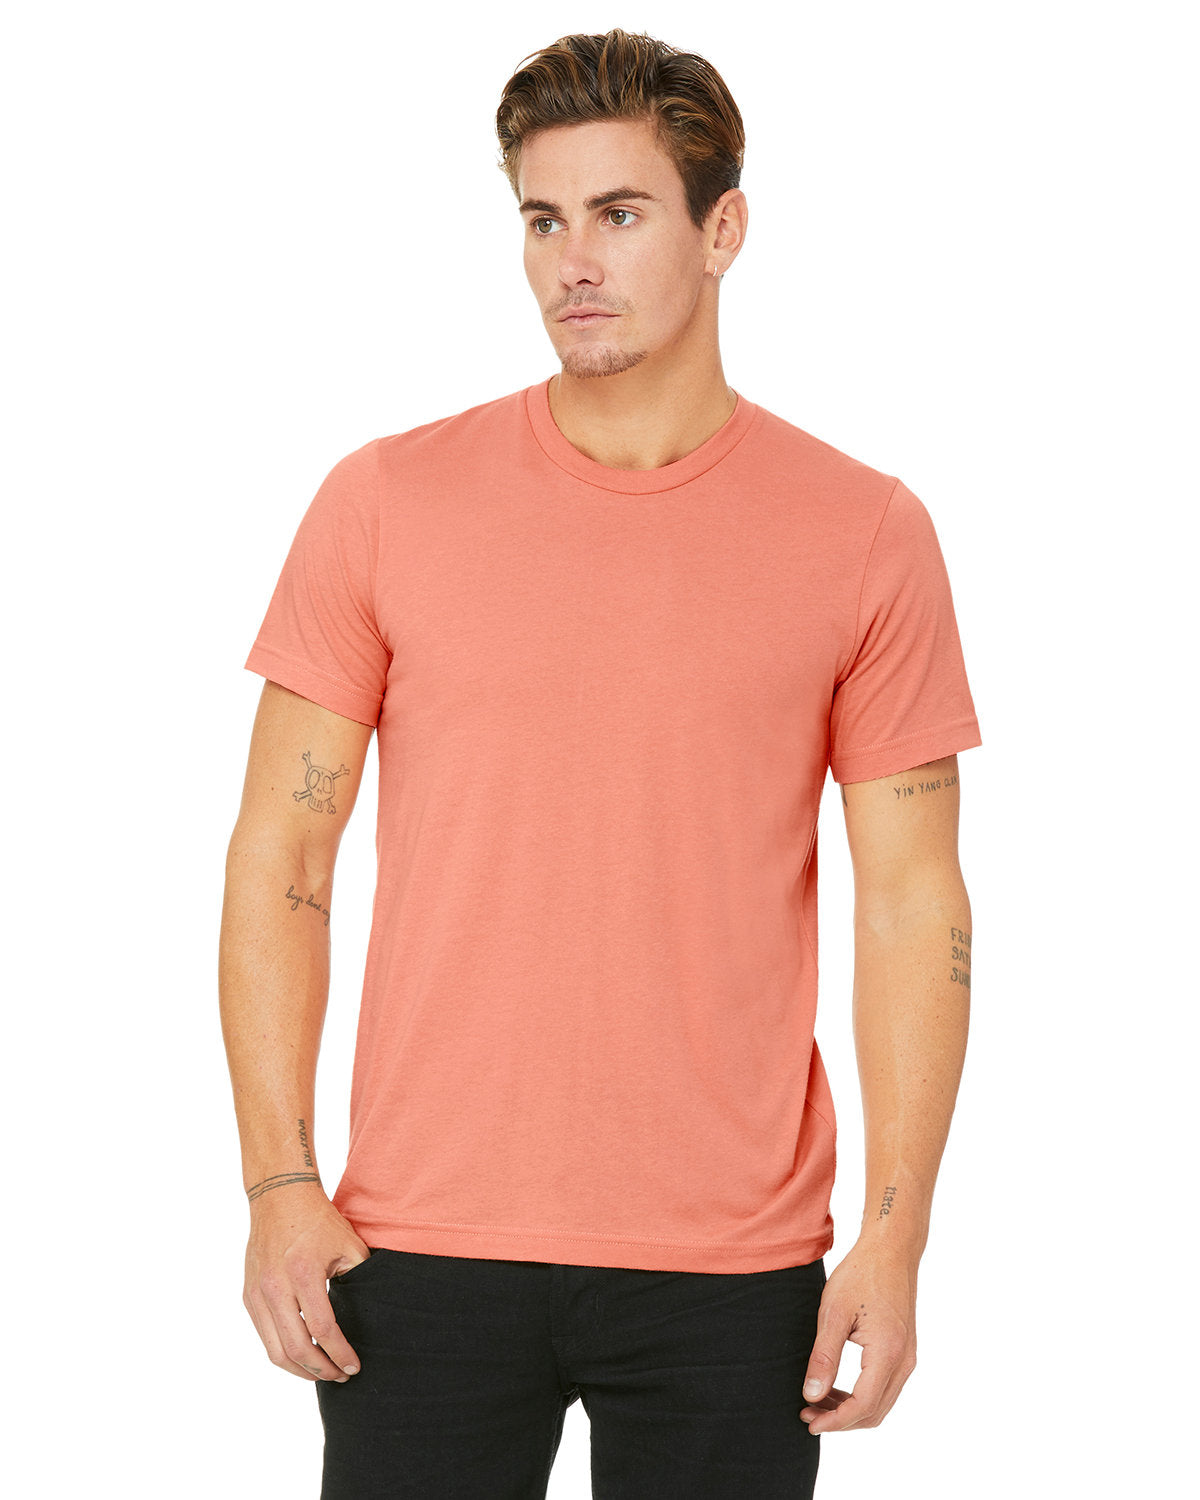 Adult Polyester Shirt: Crew Neck - Soft Polyester Blank Apparel for Su